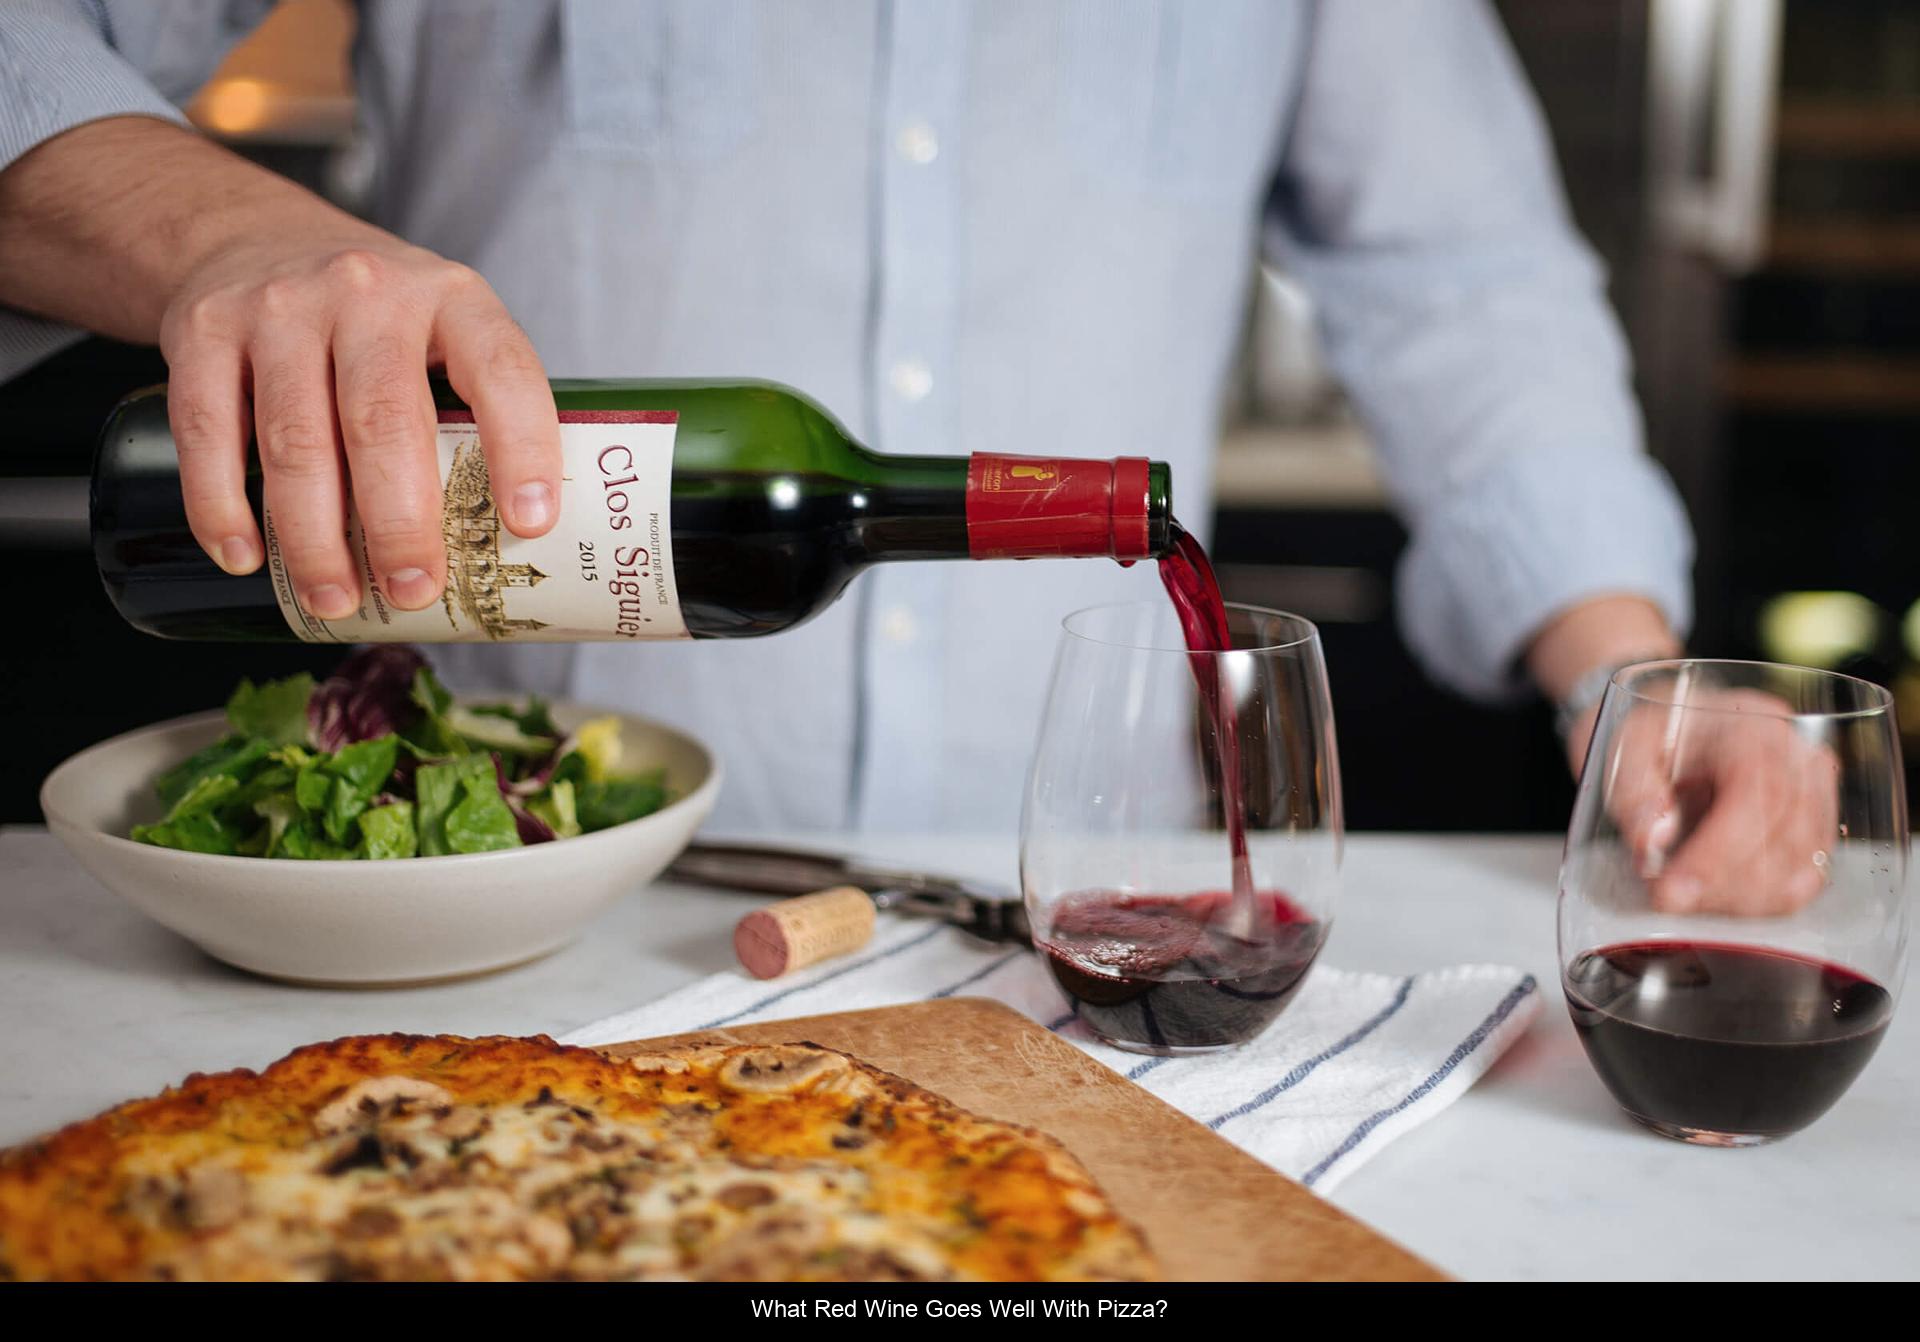 What red wine goes well with pizza?